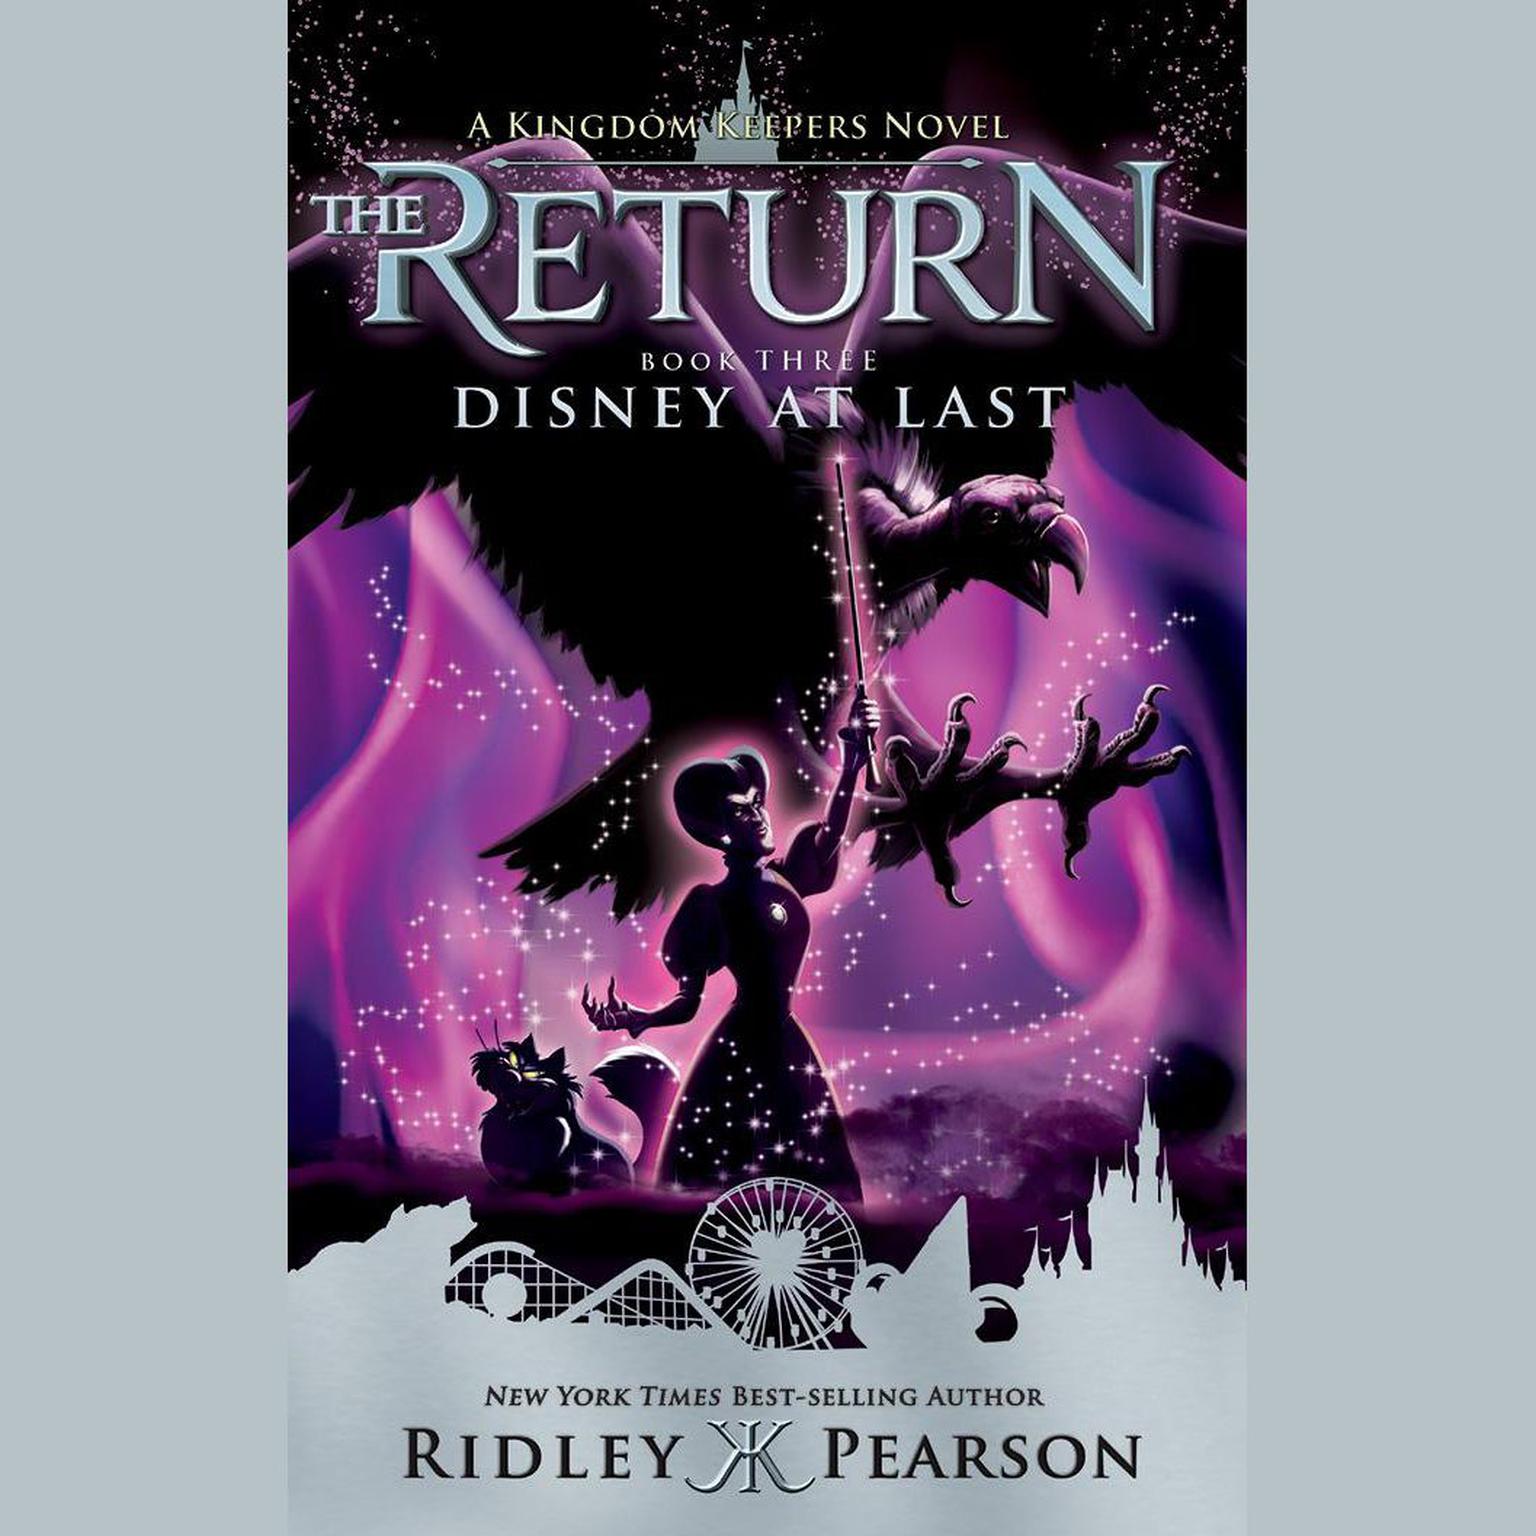 Kingdom Keepers: The Return Book Three Disney at Last Audiobook, by Ridley Pearson